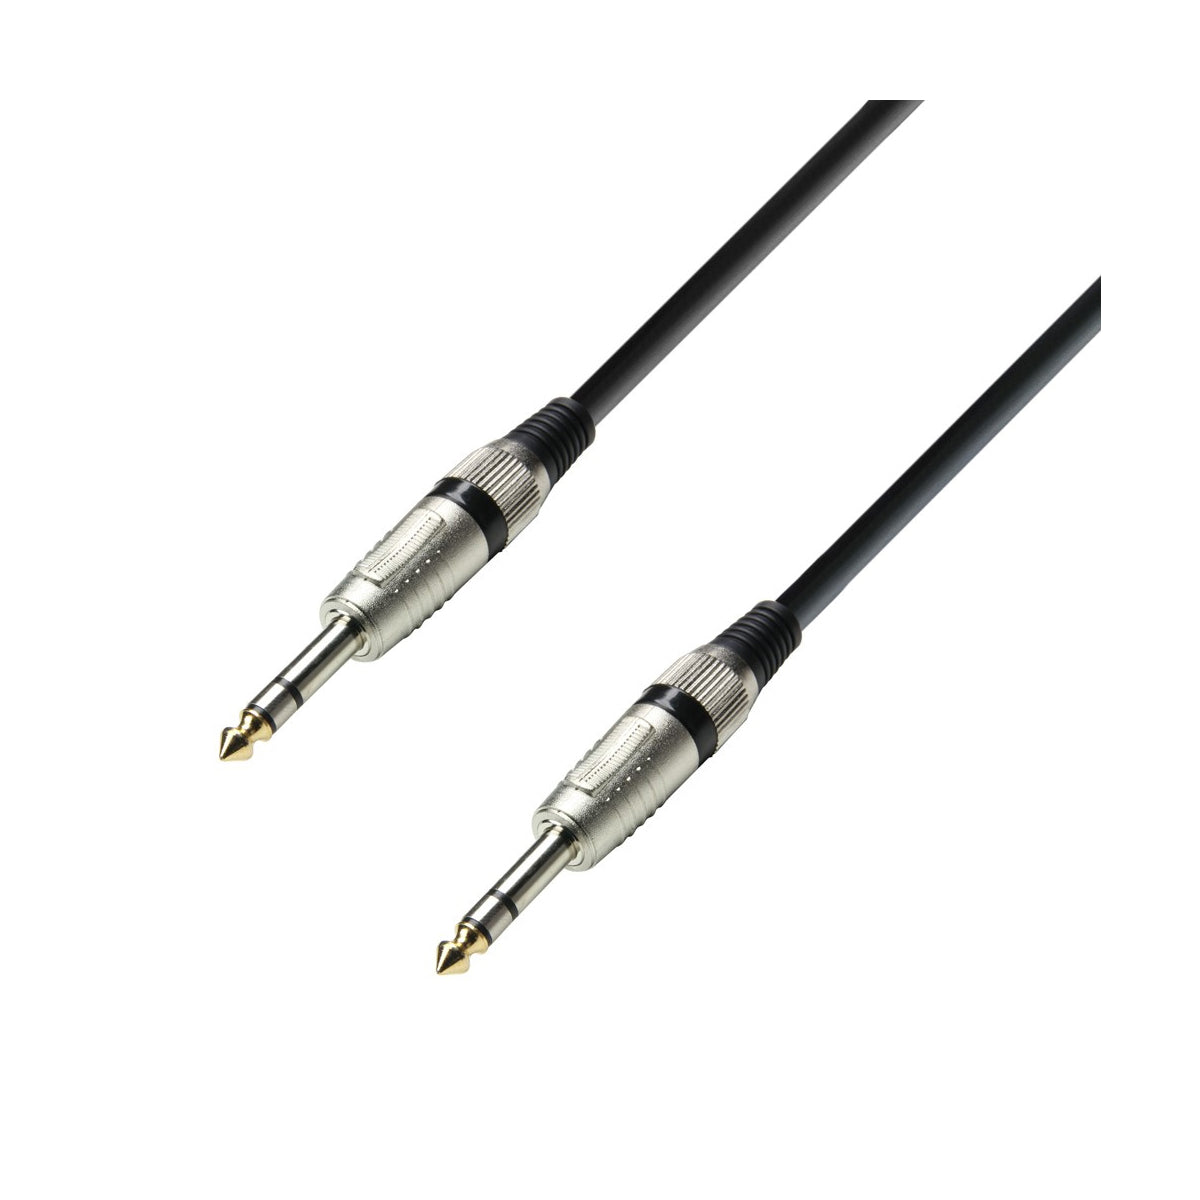 Adam Hall Cables K3 BVV 0300 - Audio Cable 6.3mm Jack stereo to 6.3mm Jack stereo 3m